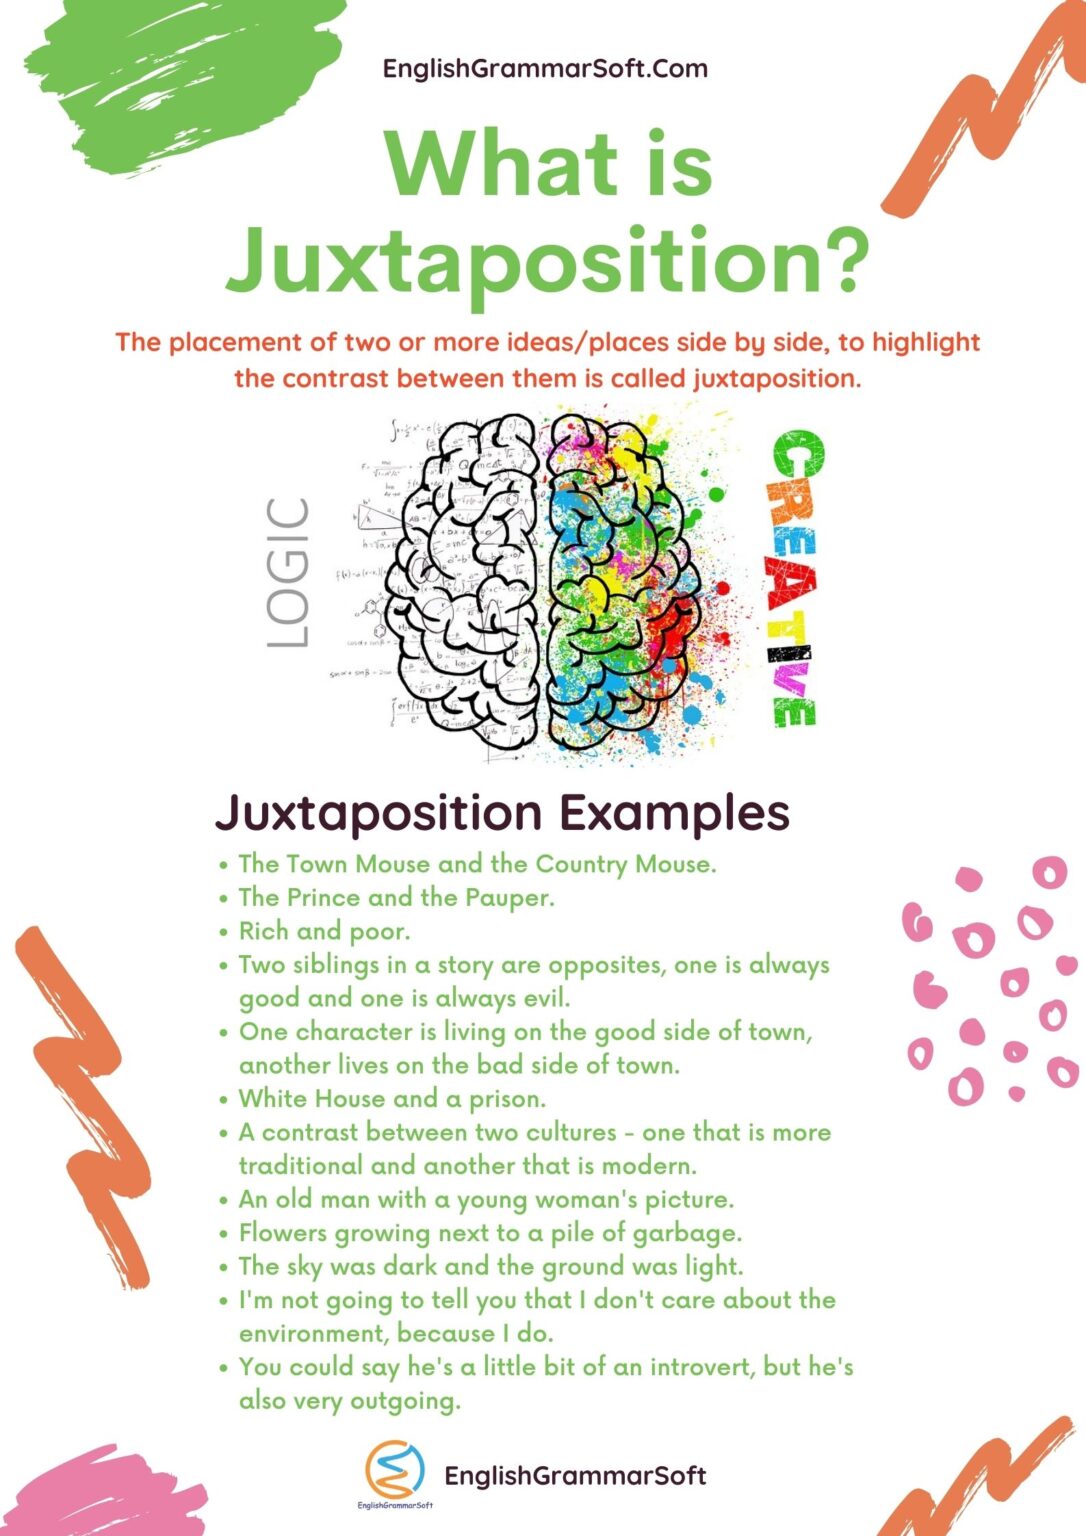 how to start a juxtaposition essay